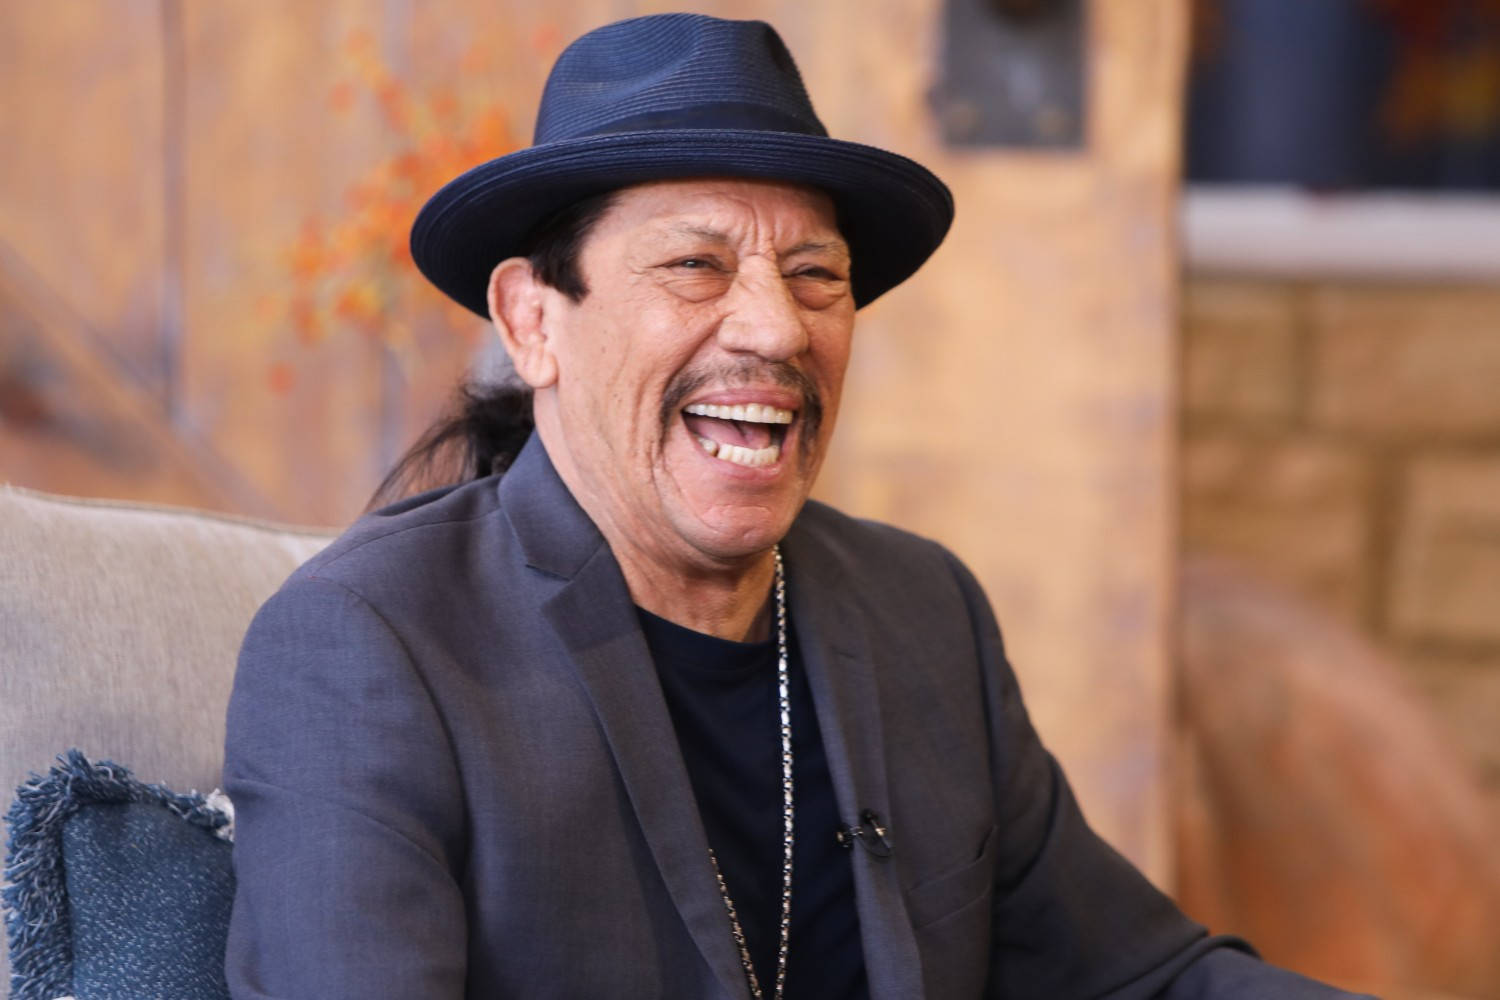 Danny Trejo Laughing In Talk Show Background